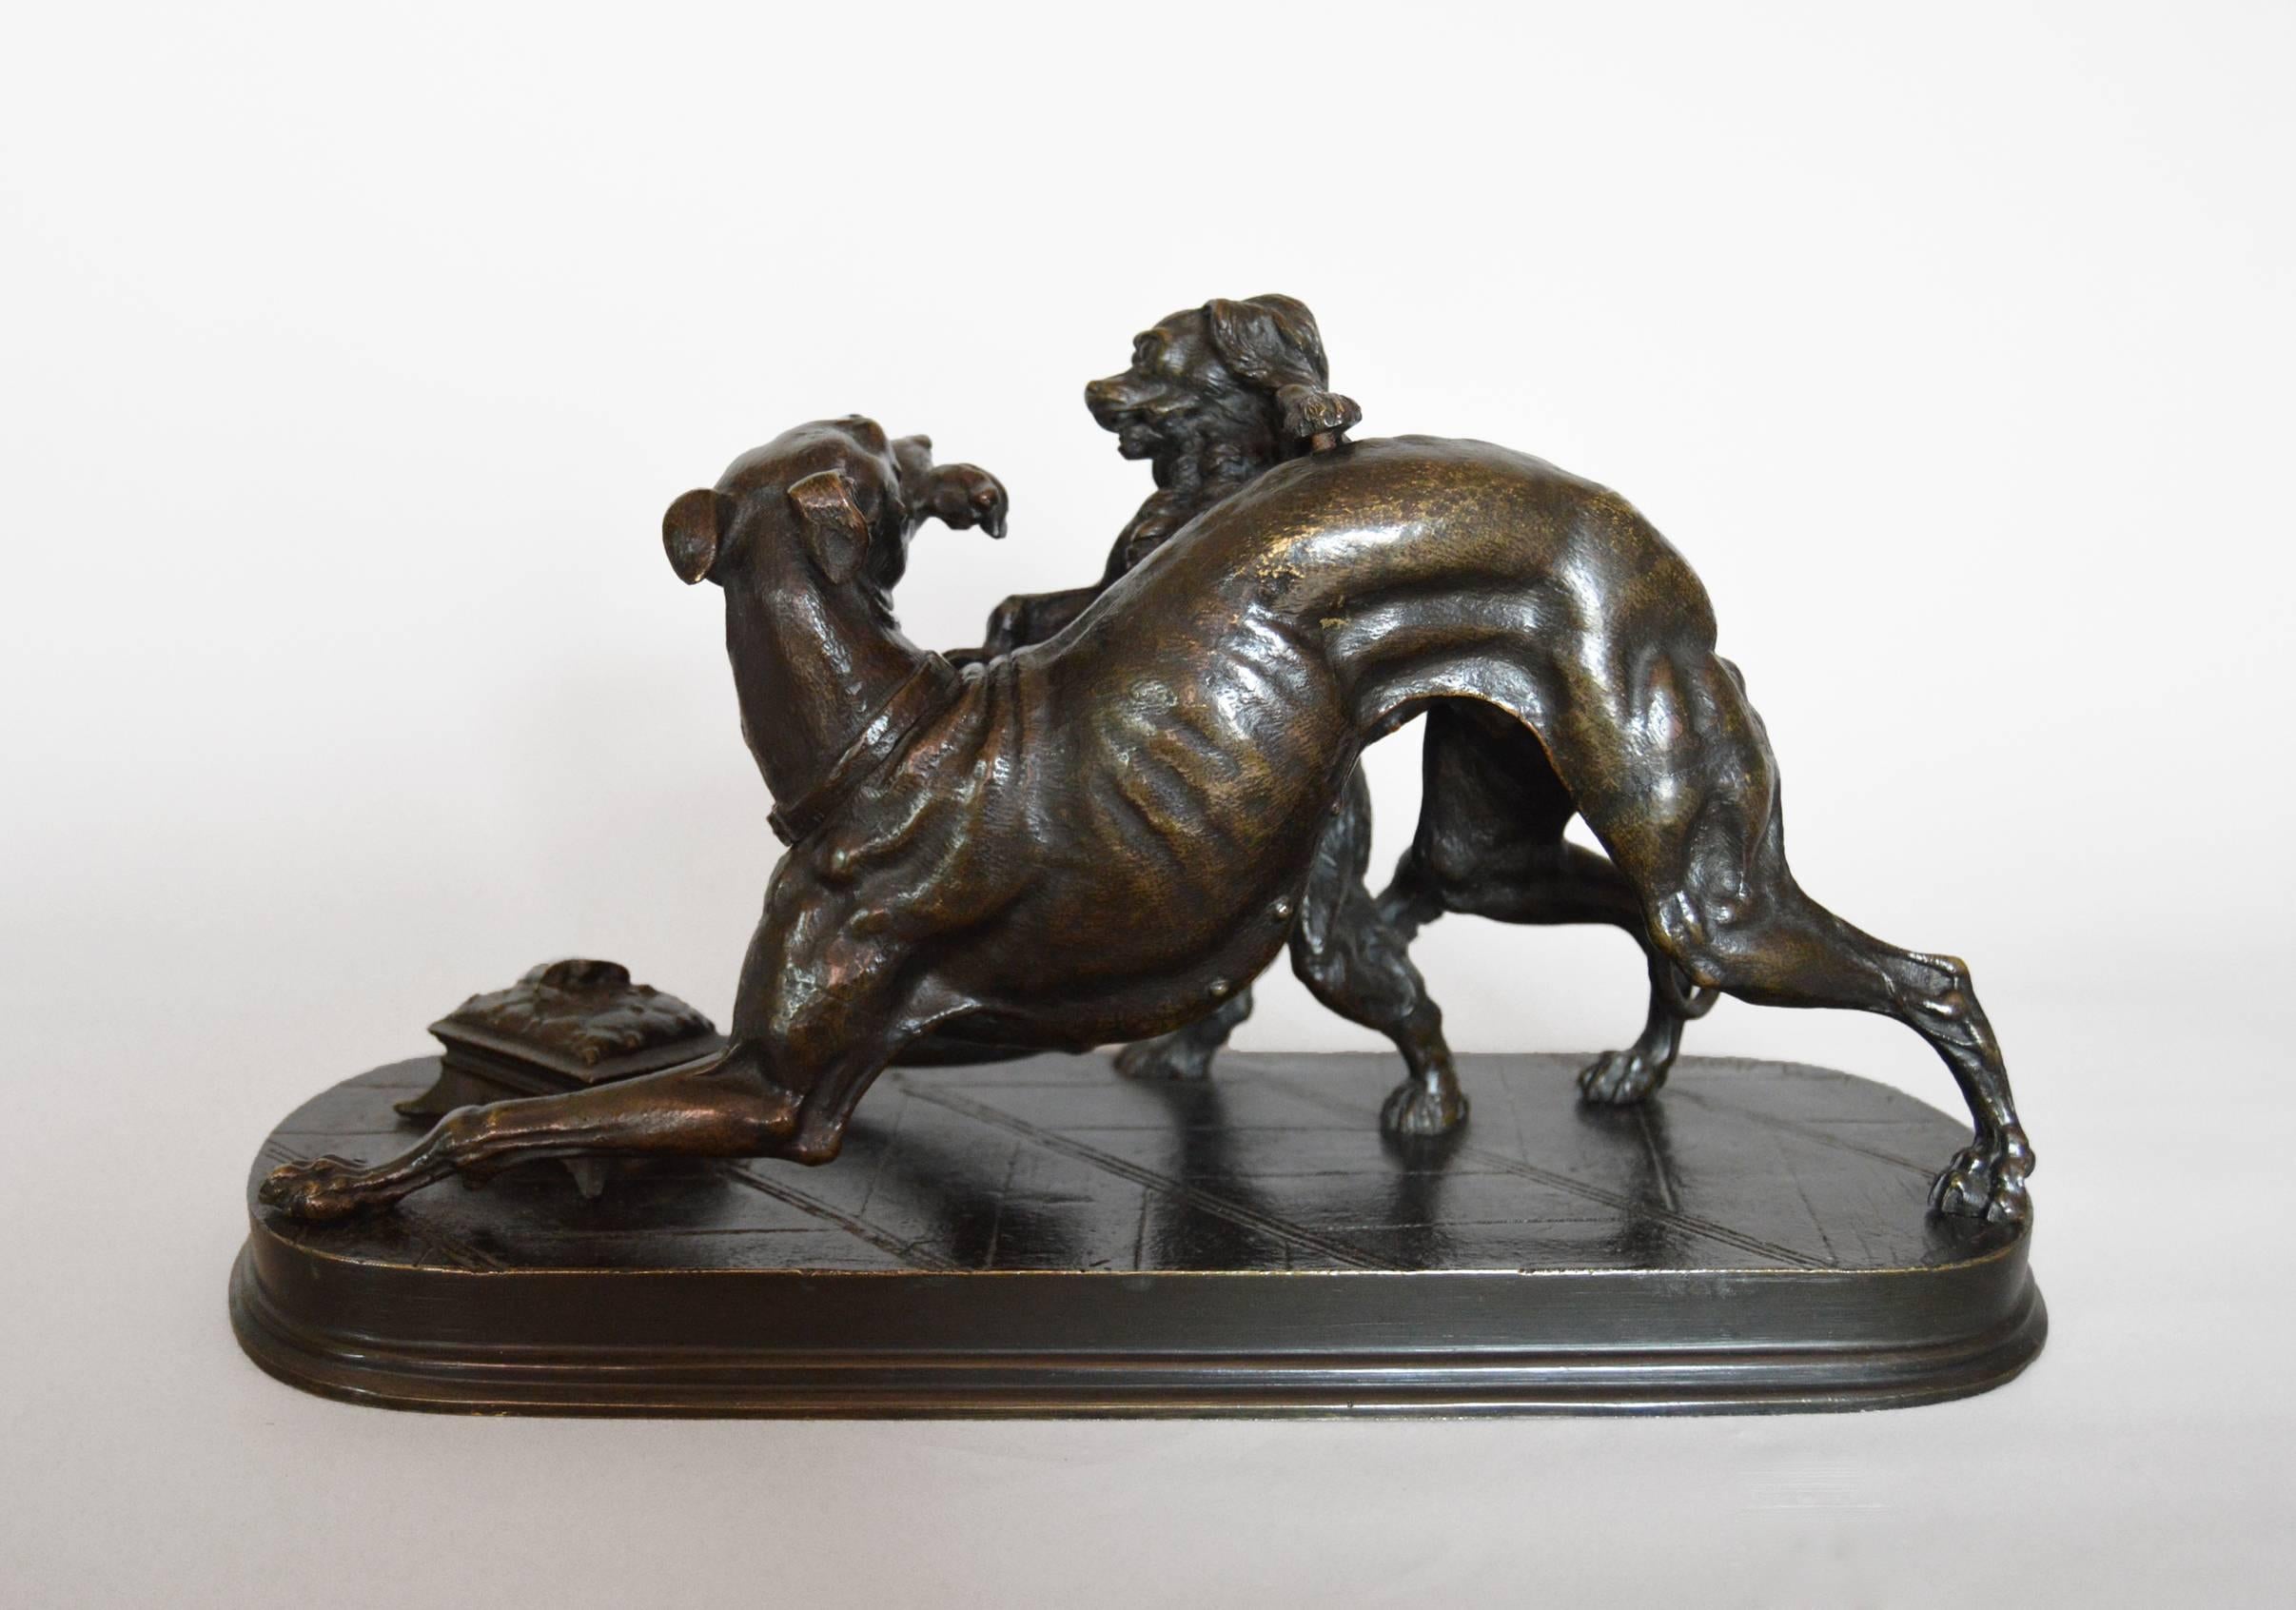 Jules Moigniez was a well-known animal sculptor who was born in Senlis in 1835, the son of a metal gilder. He studied under Paul Comolera  (1818 – 1897) who was to have a great influence on his work and first exhibited at the 1855 Exposition